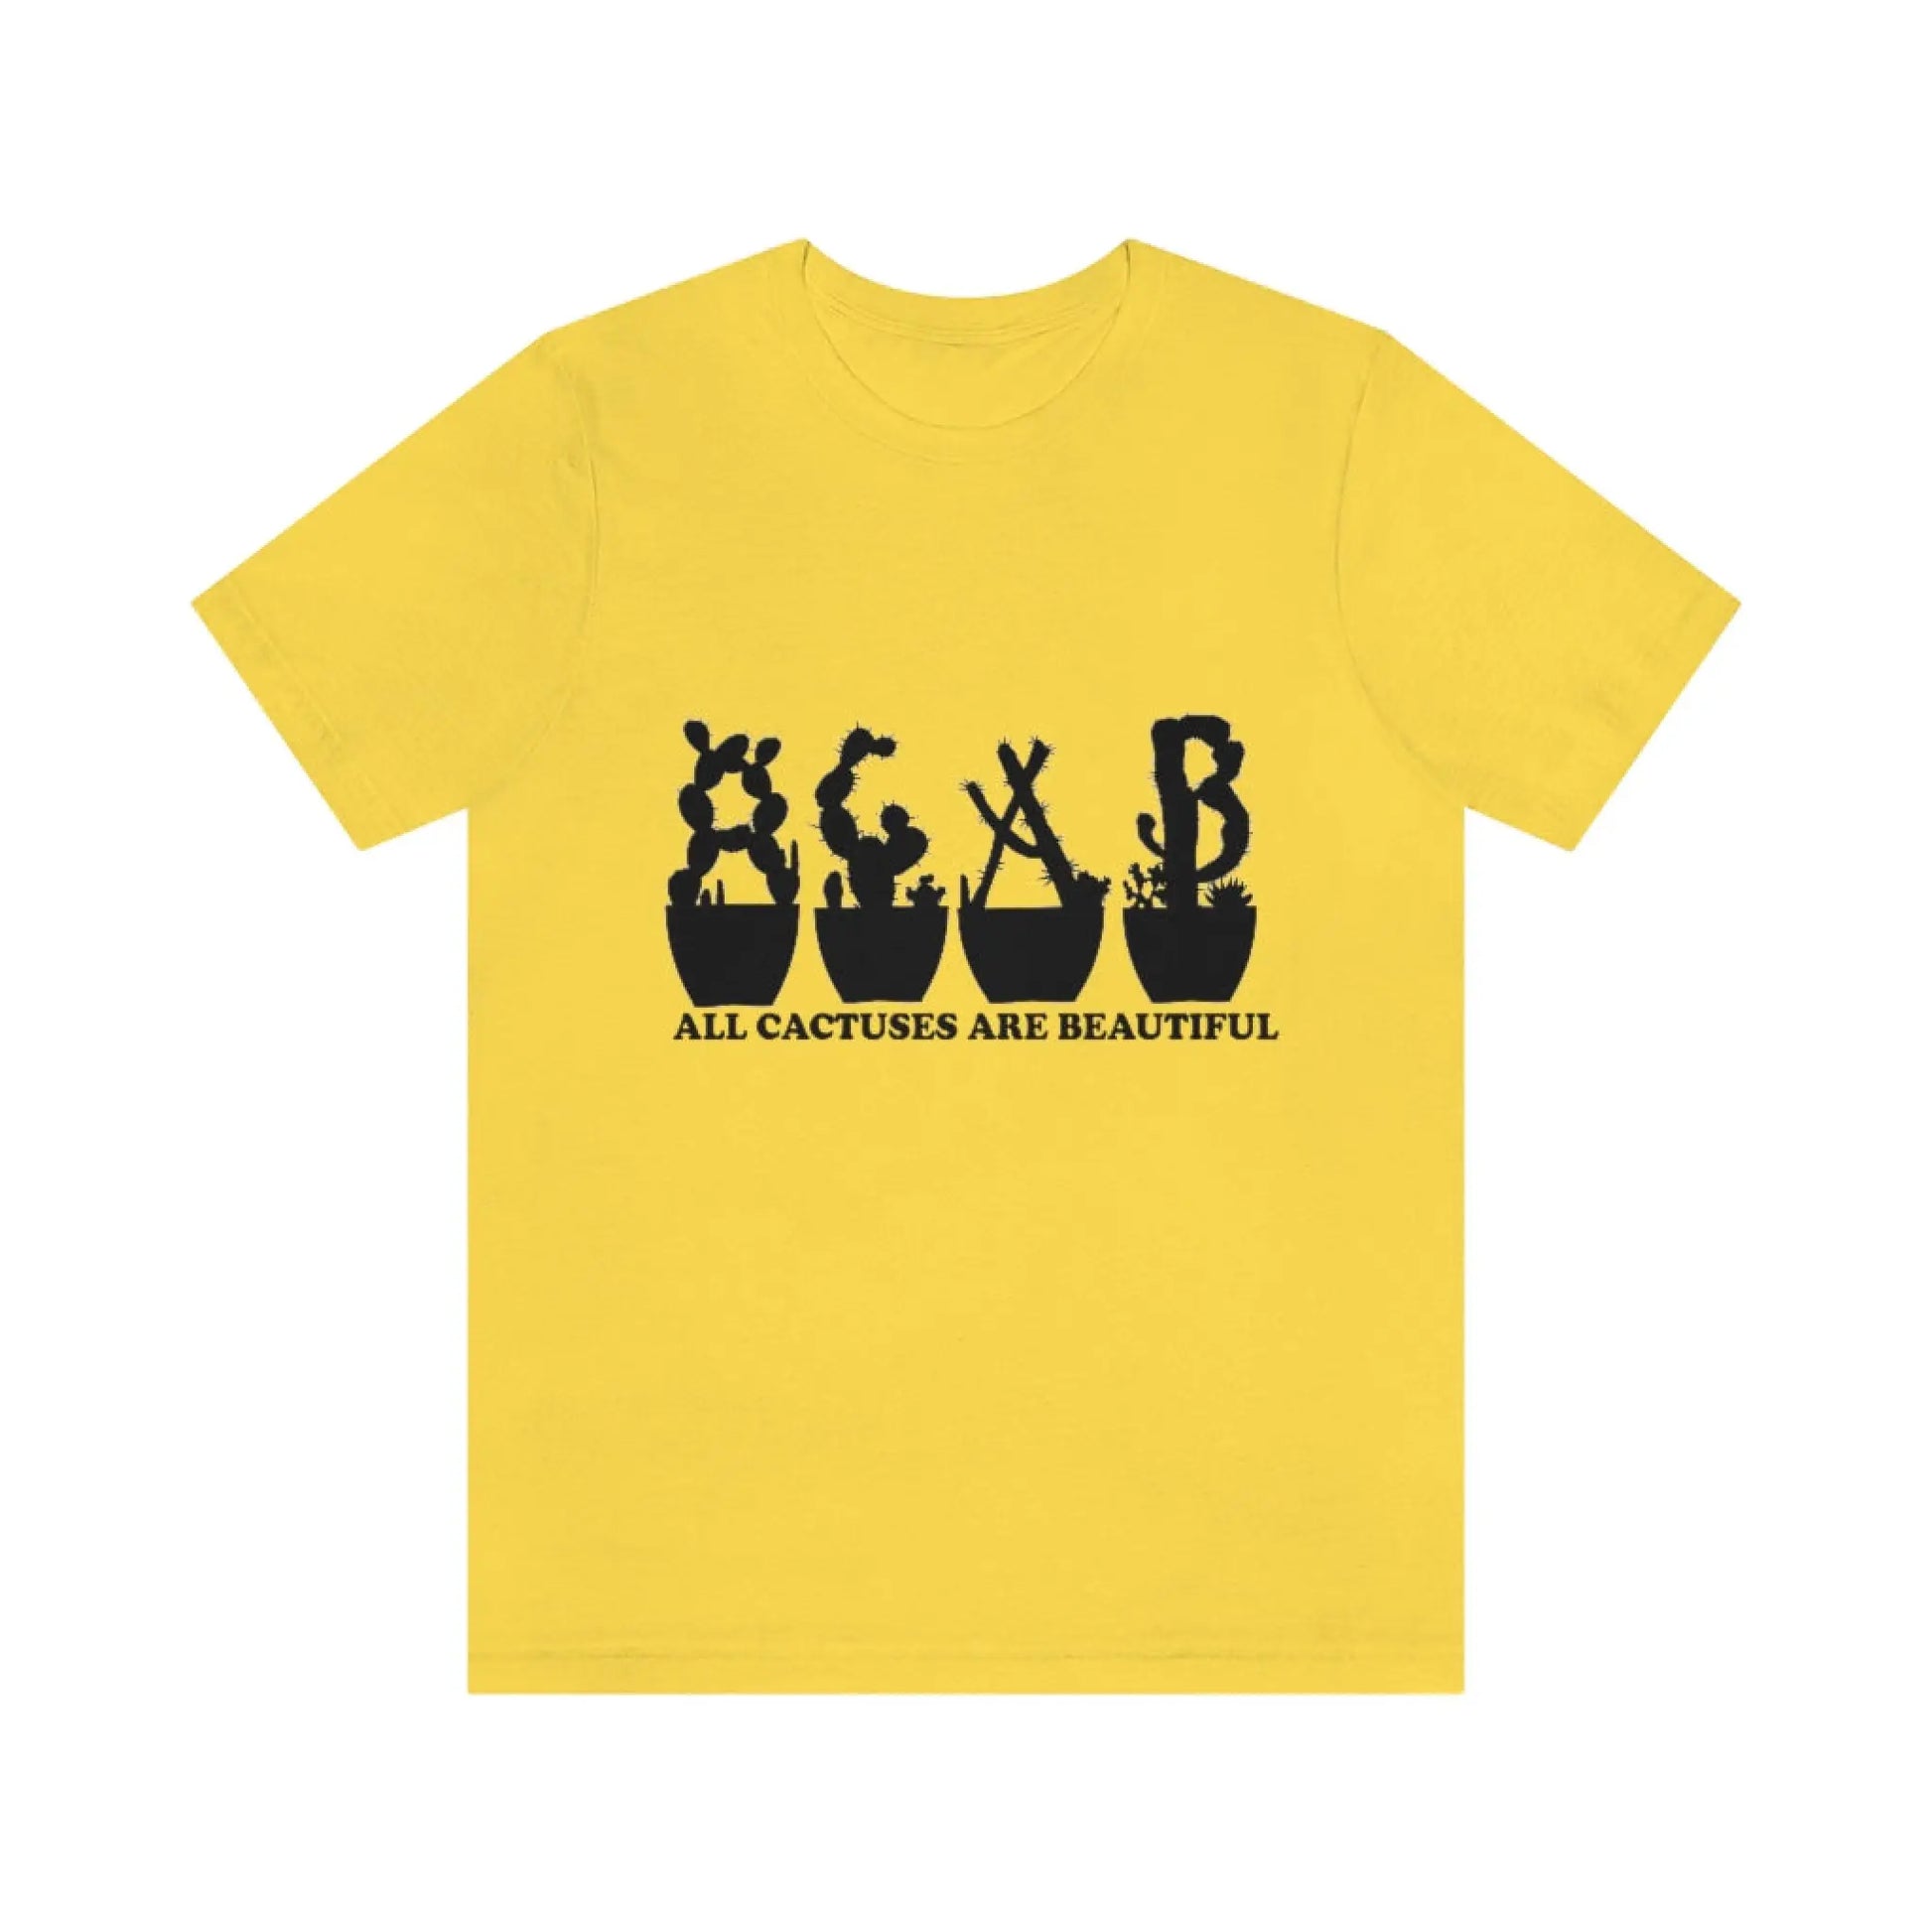 Shirts - All Cactuses Are Beautiful - Yellow / S - T-Shirt